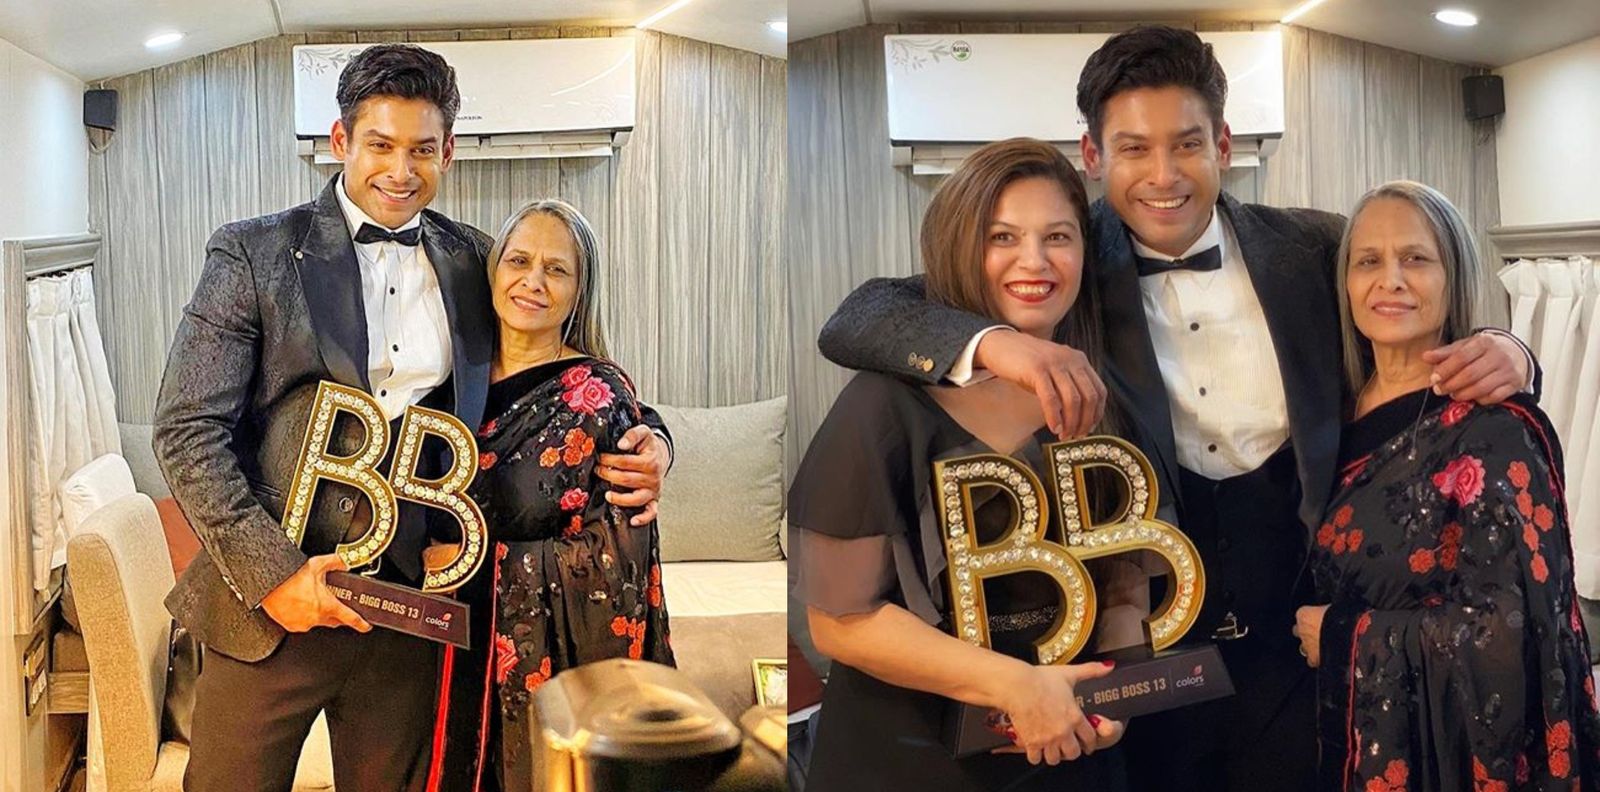 Bigg Boss 13: Sidharth Shukla Poses With Mother And Sister Post Win, Shares A Heartfelt Message For Fans!